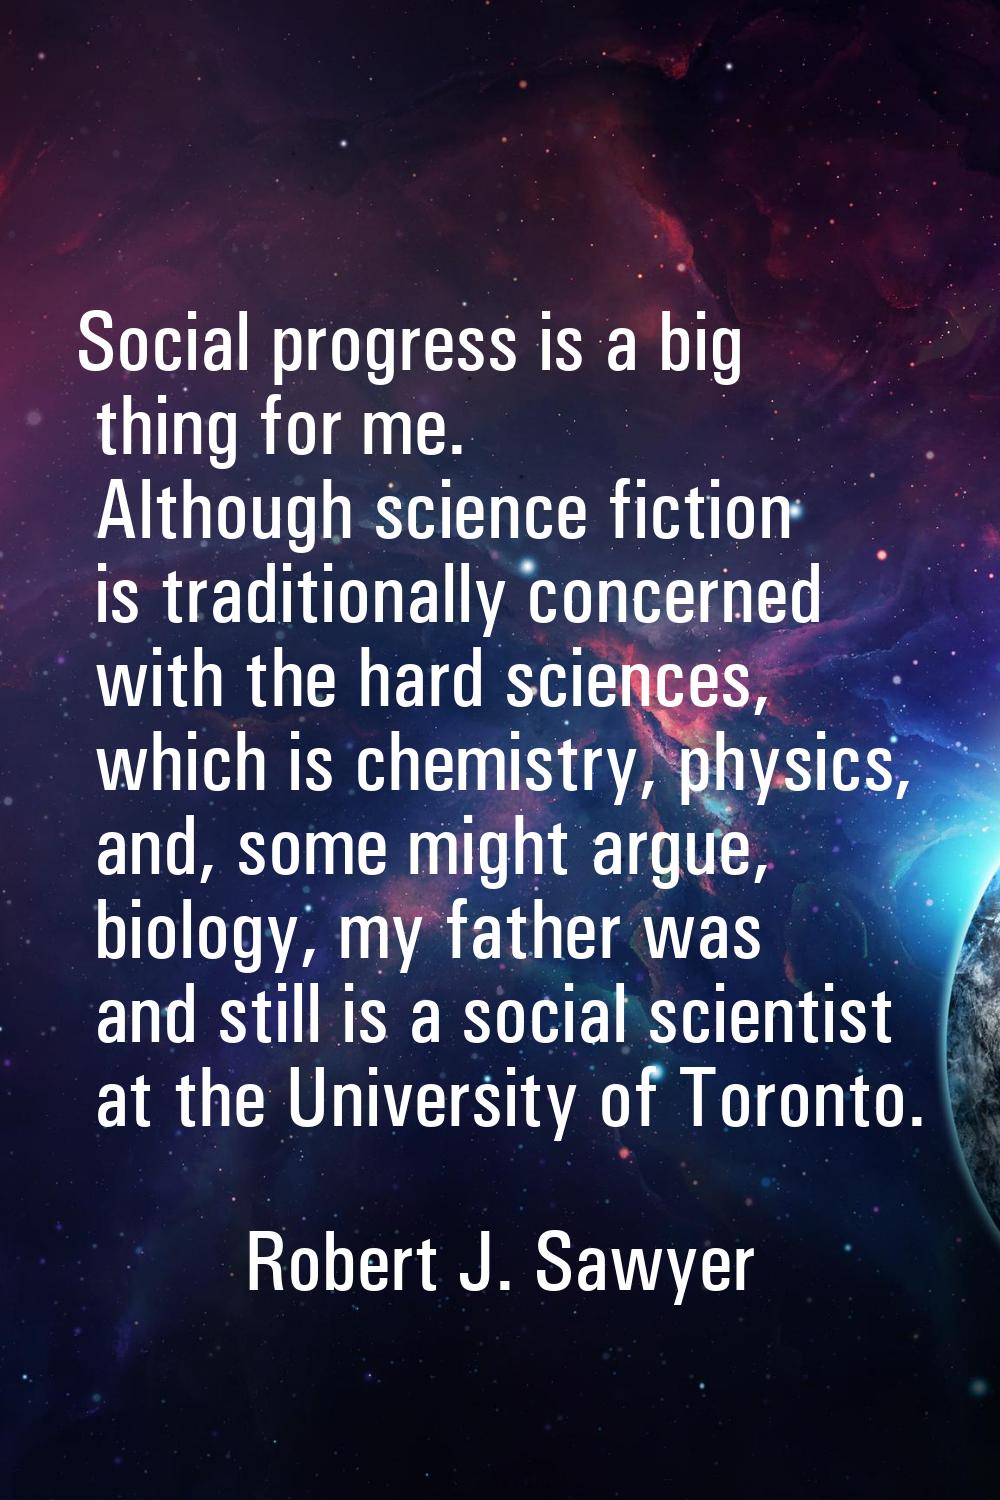 Social progress is a big thing for me. Although science fiction is traditionally concerned with the